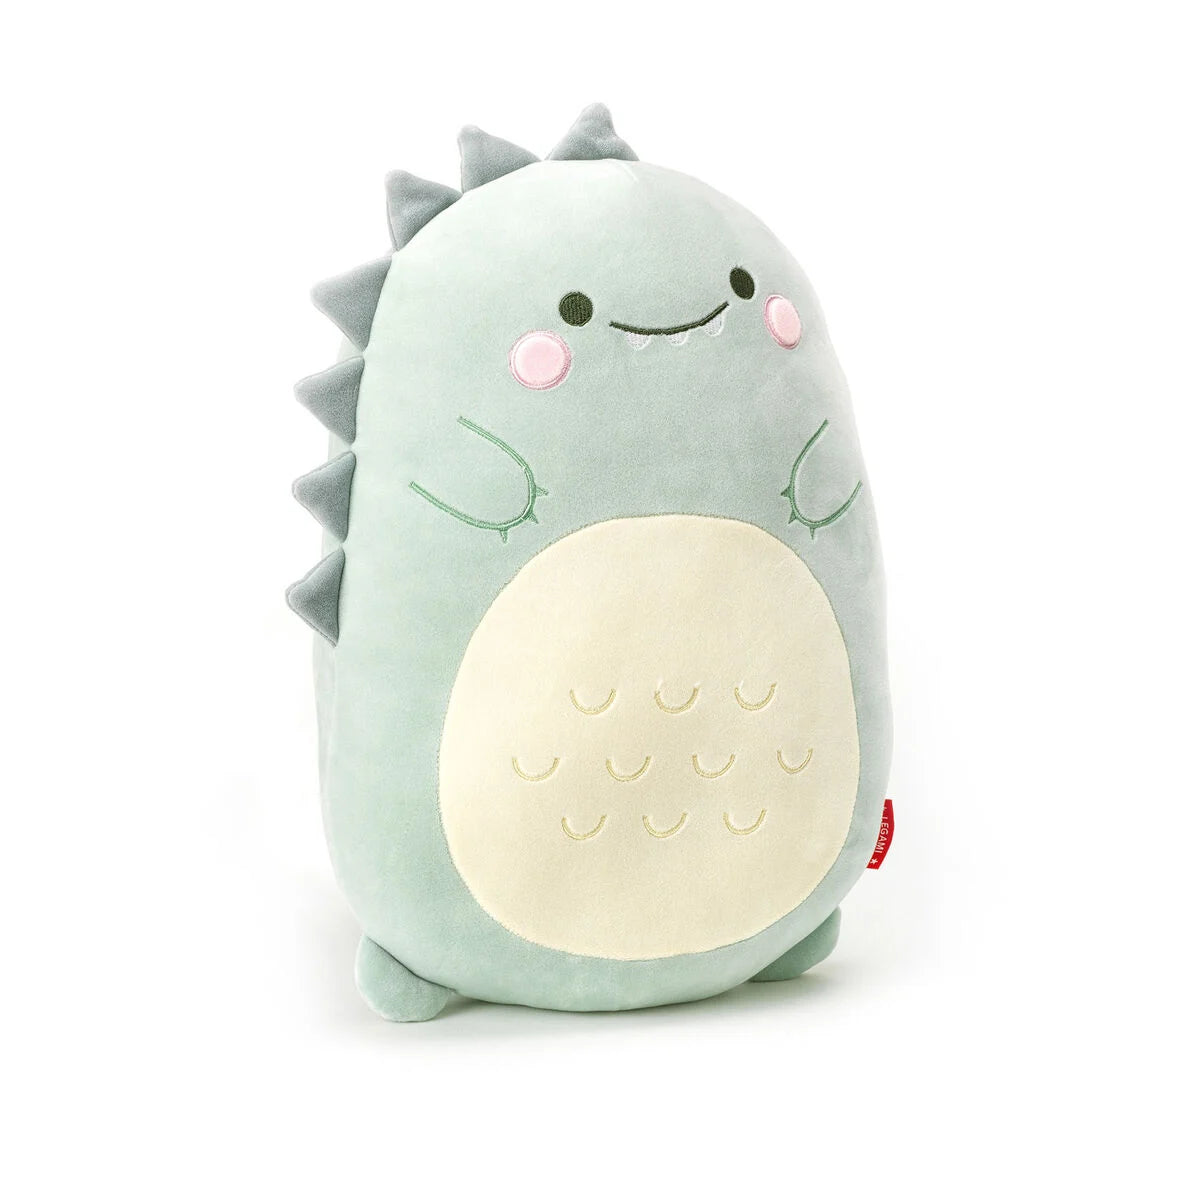 Fab Gifts | Legami Super Soft! Pillow - Dino by Weirs of Baggot Street